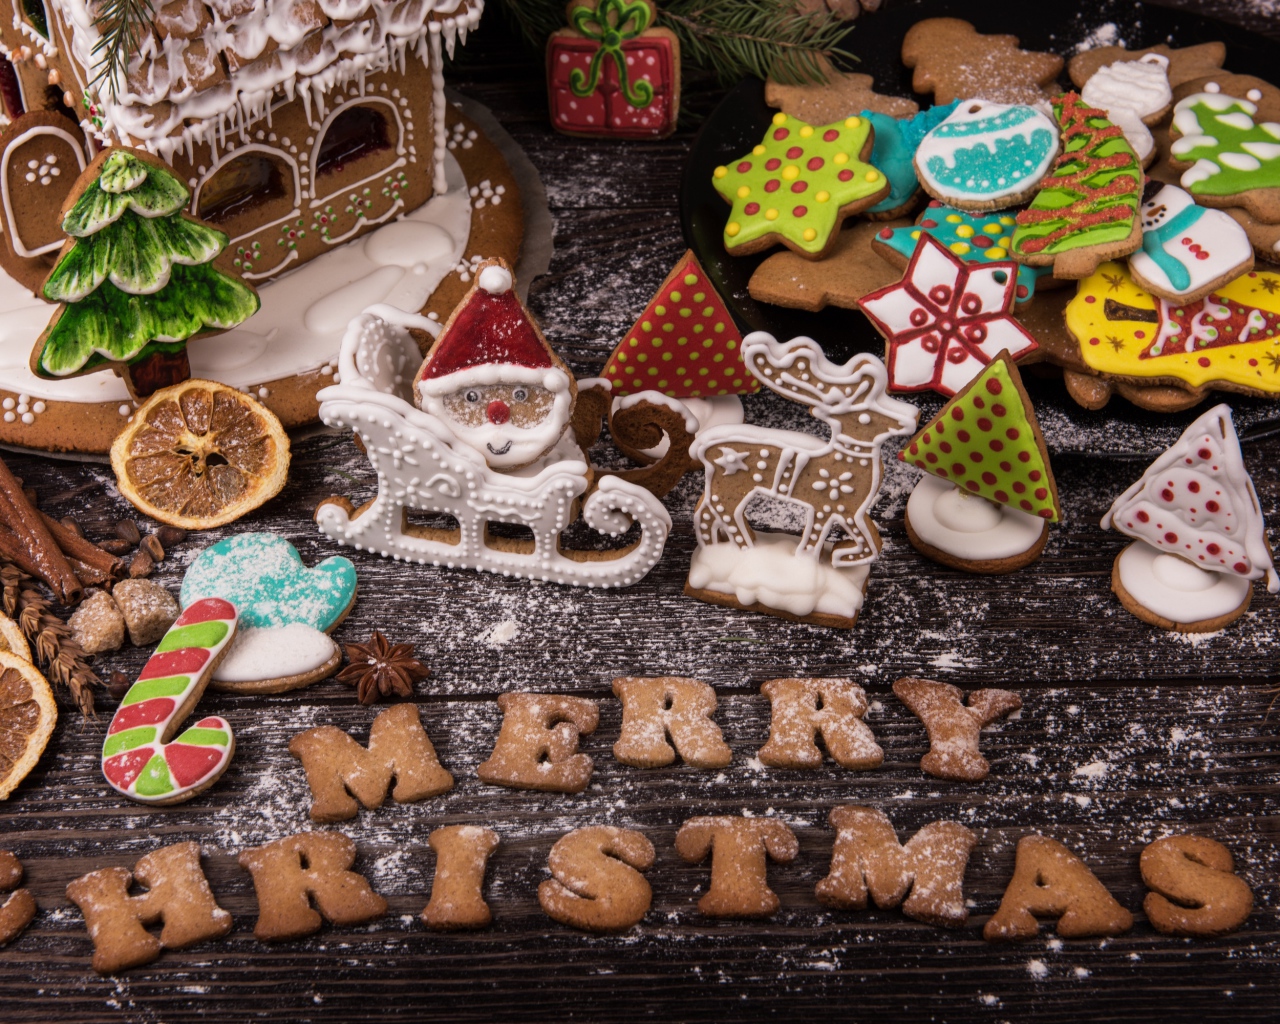 Treats for the holiday and cookies with the letters Merry Christmas